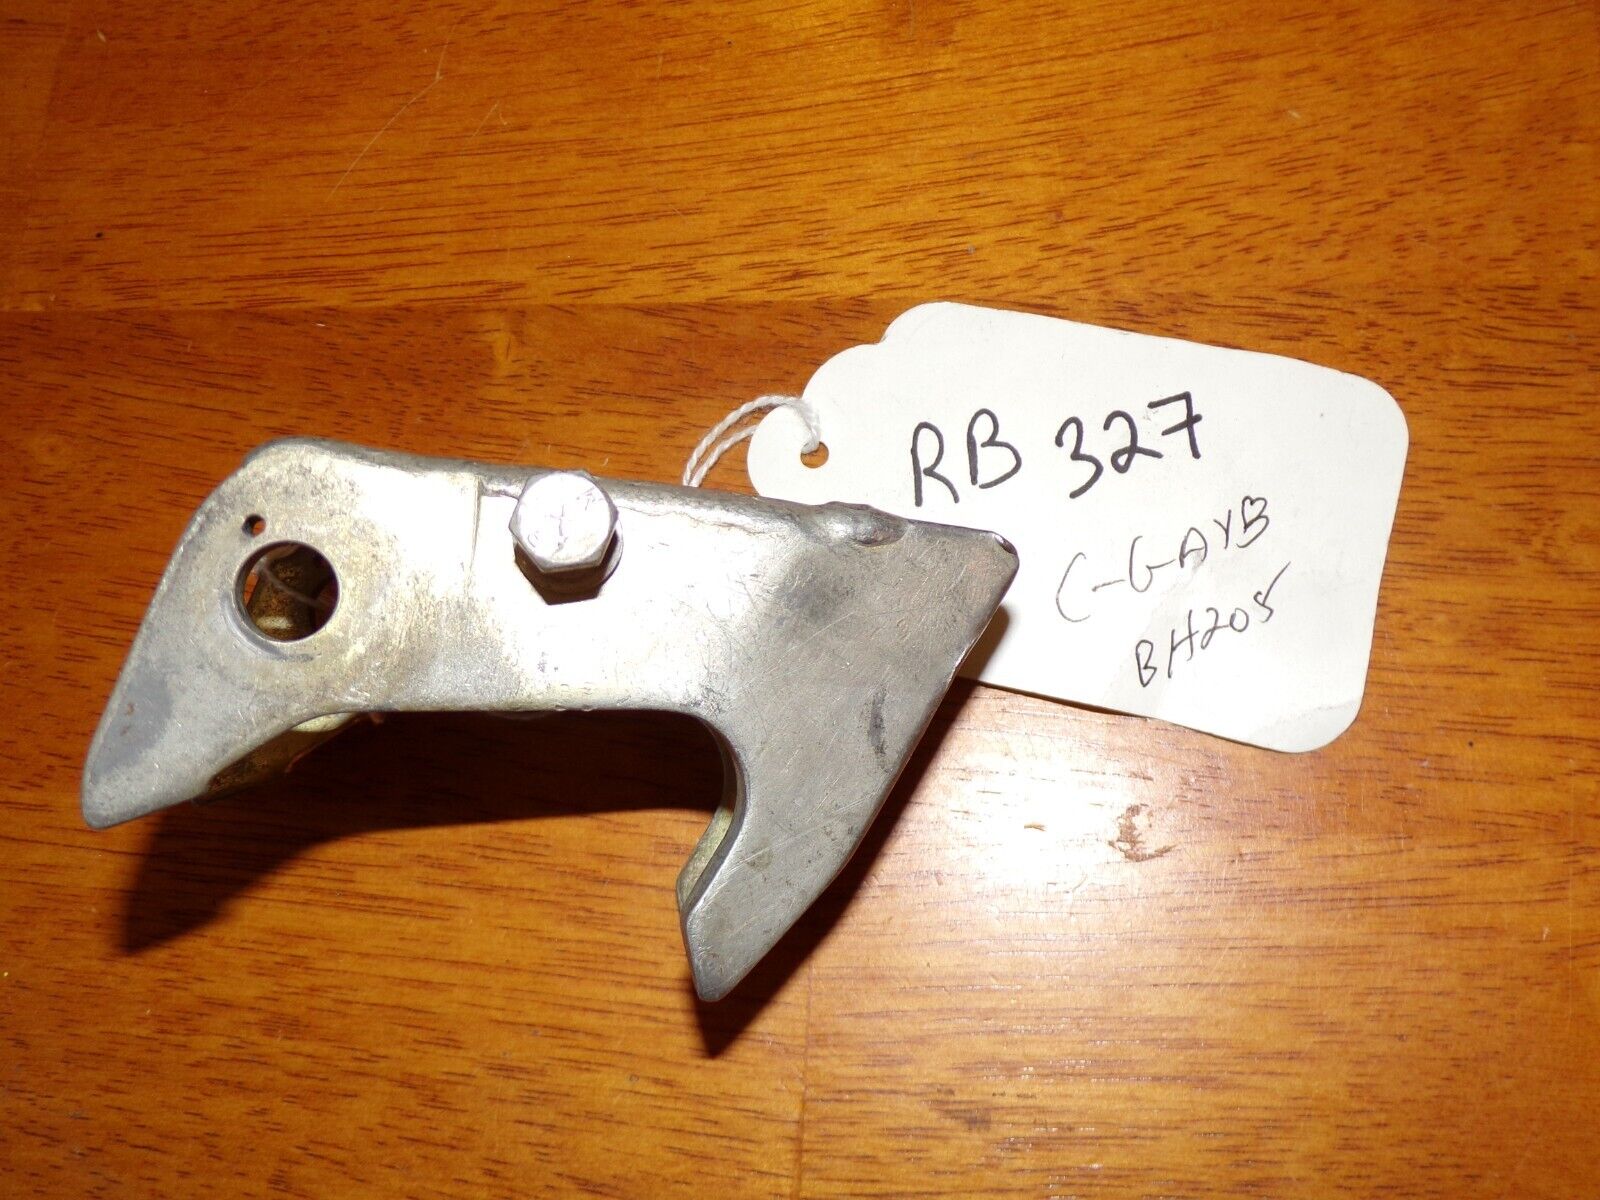 Bell 205 Helicopter Bracket